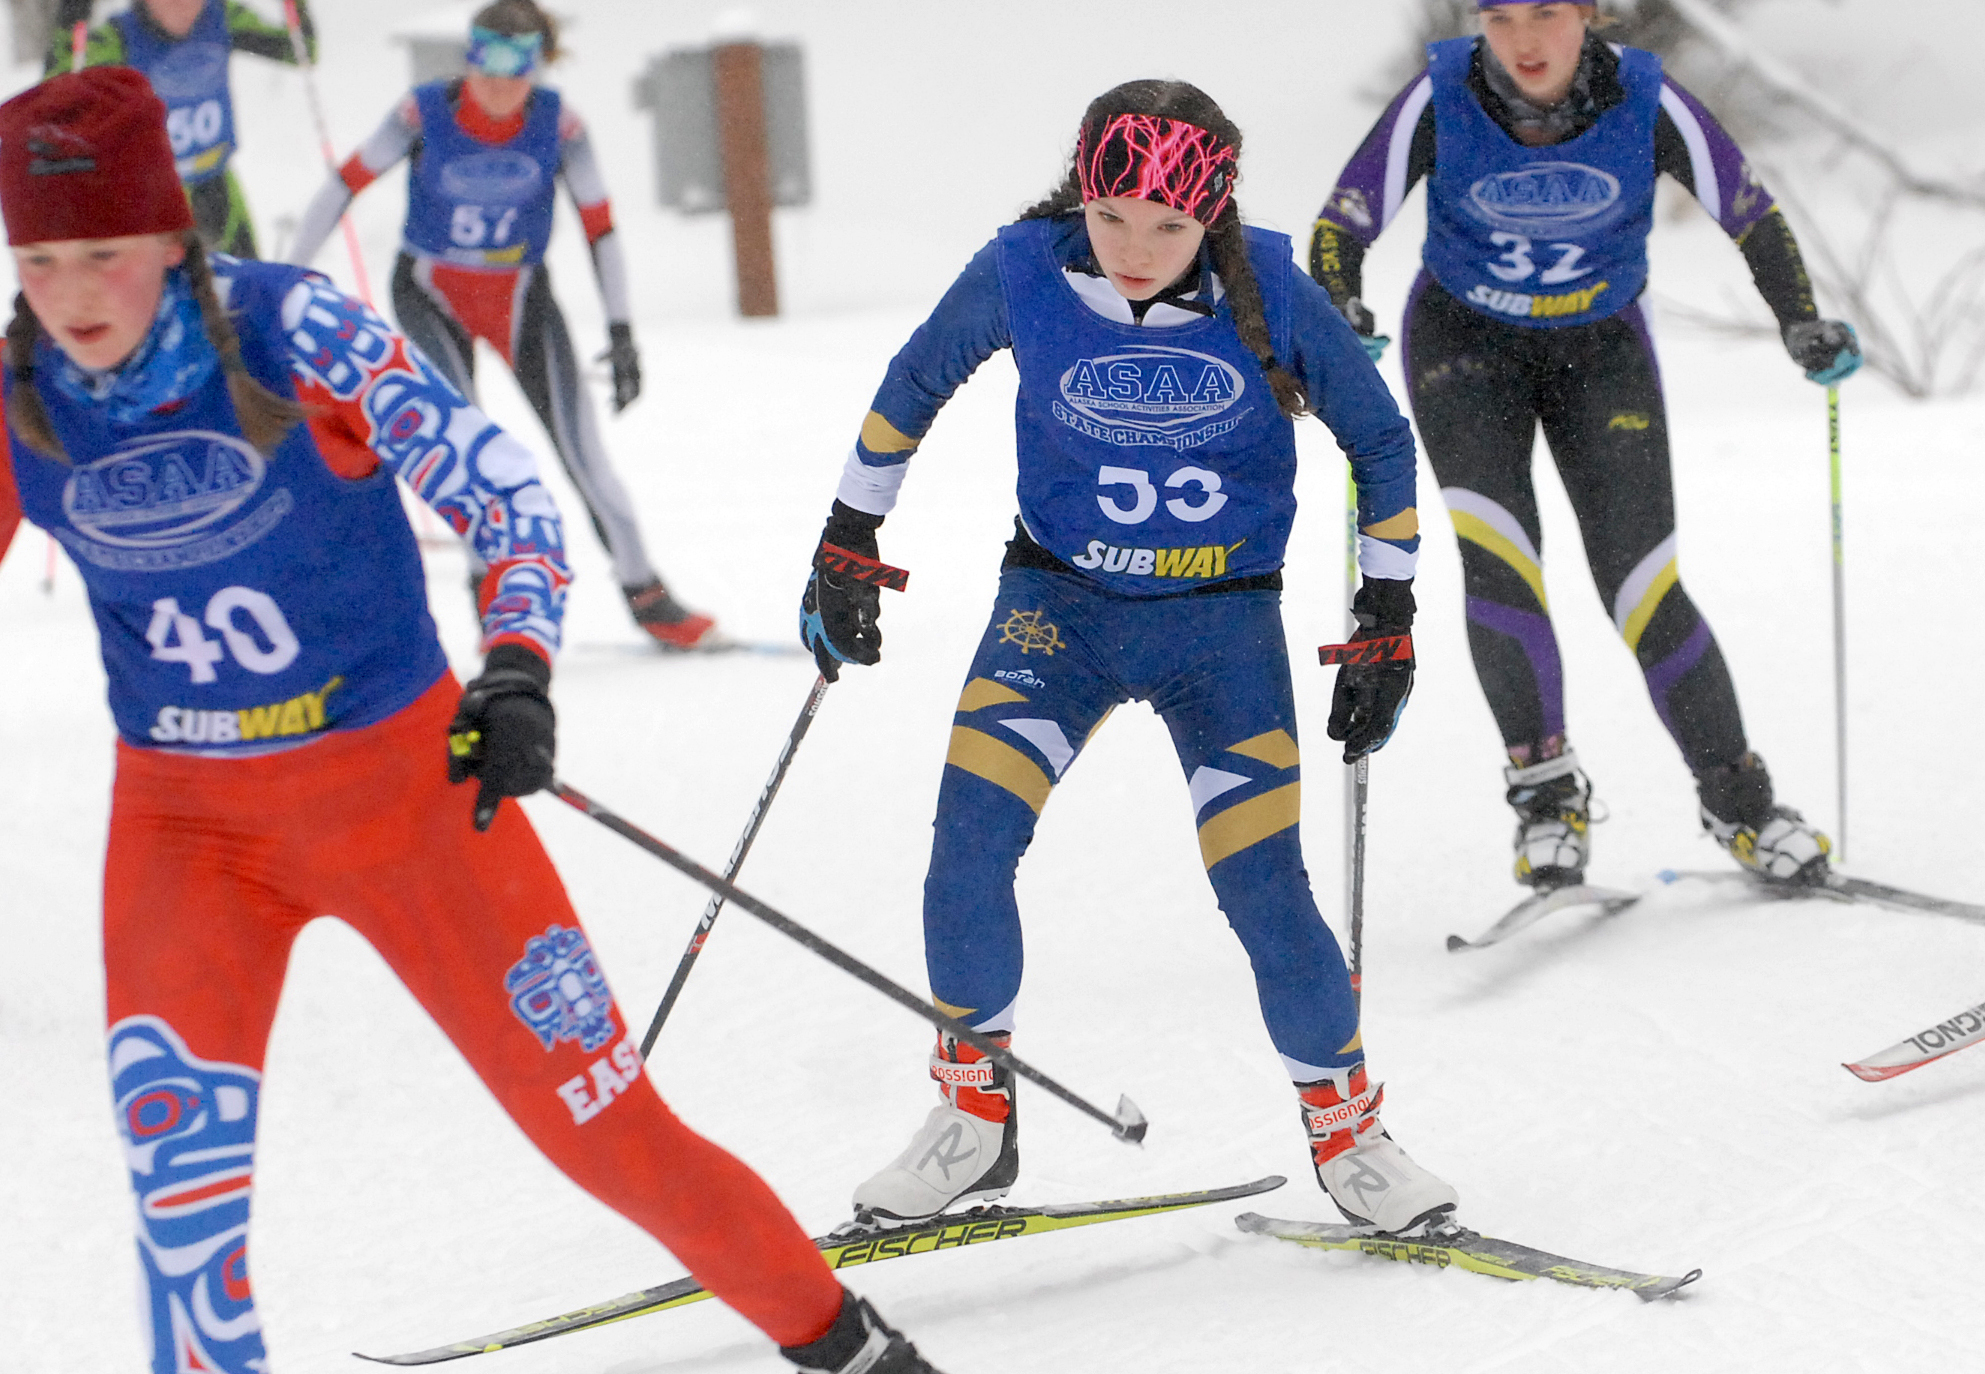 Homer’s Katie Davis races amid a pack of skiers at the state ski championships at Kincaid Park in Anchorage (Photo by Matt Tunseth/Alaska Star)